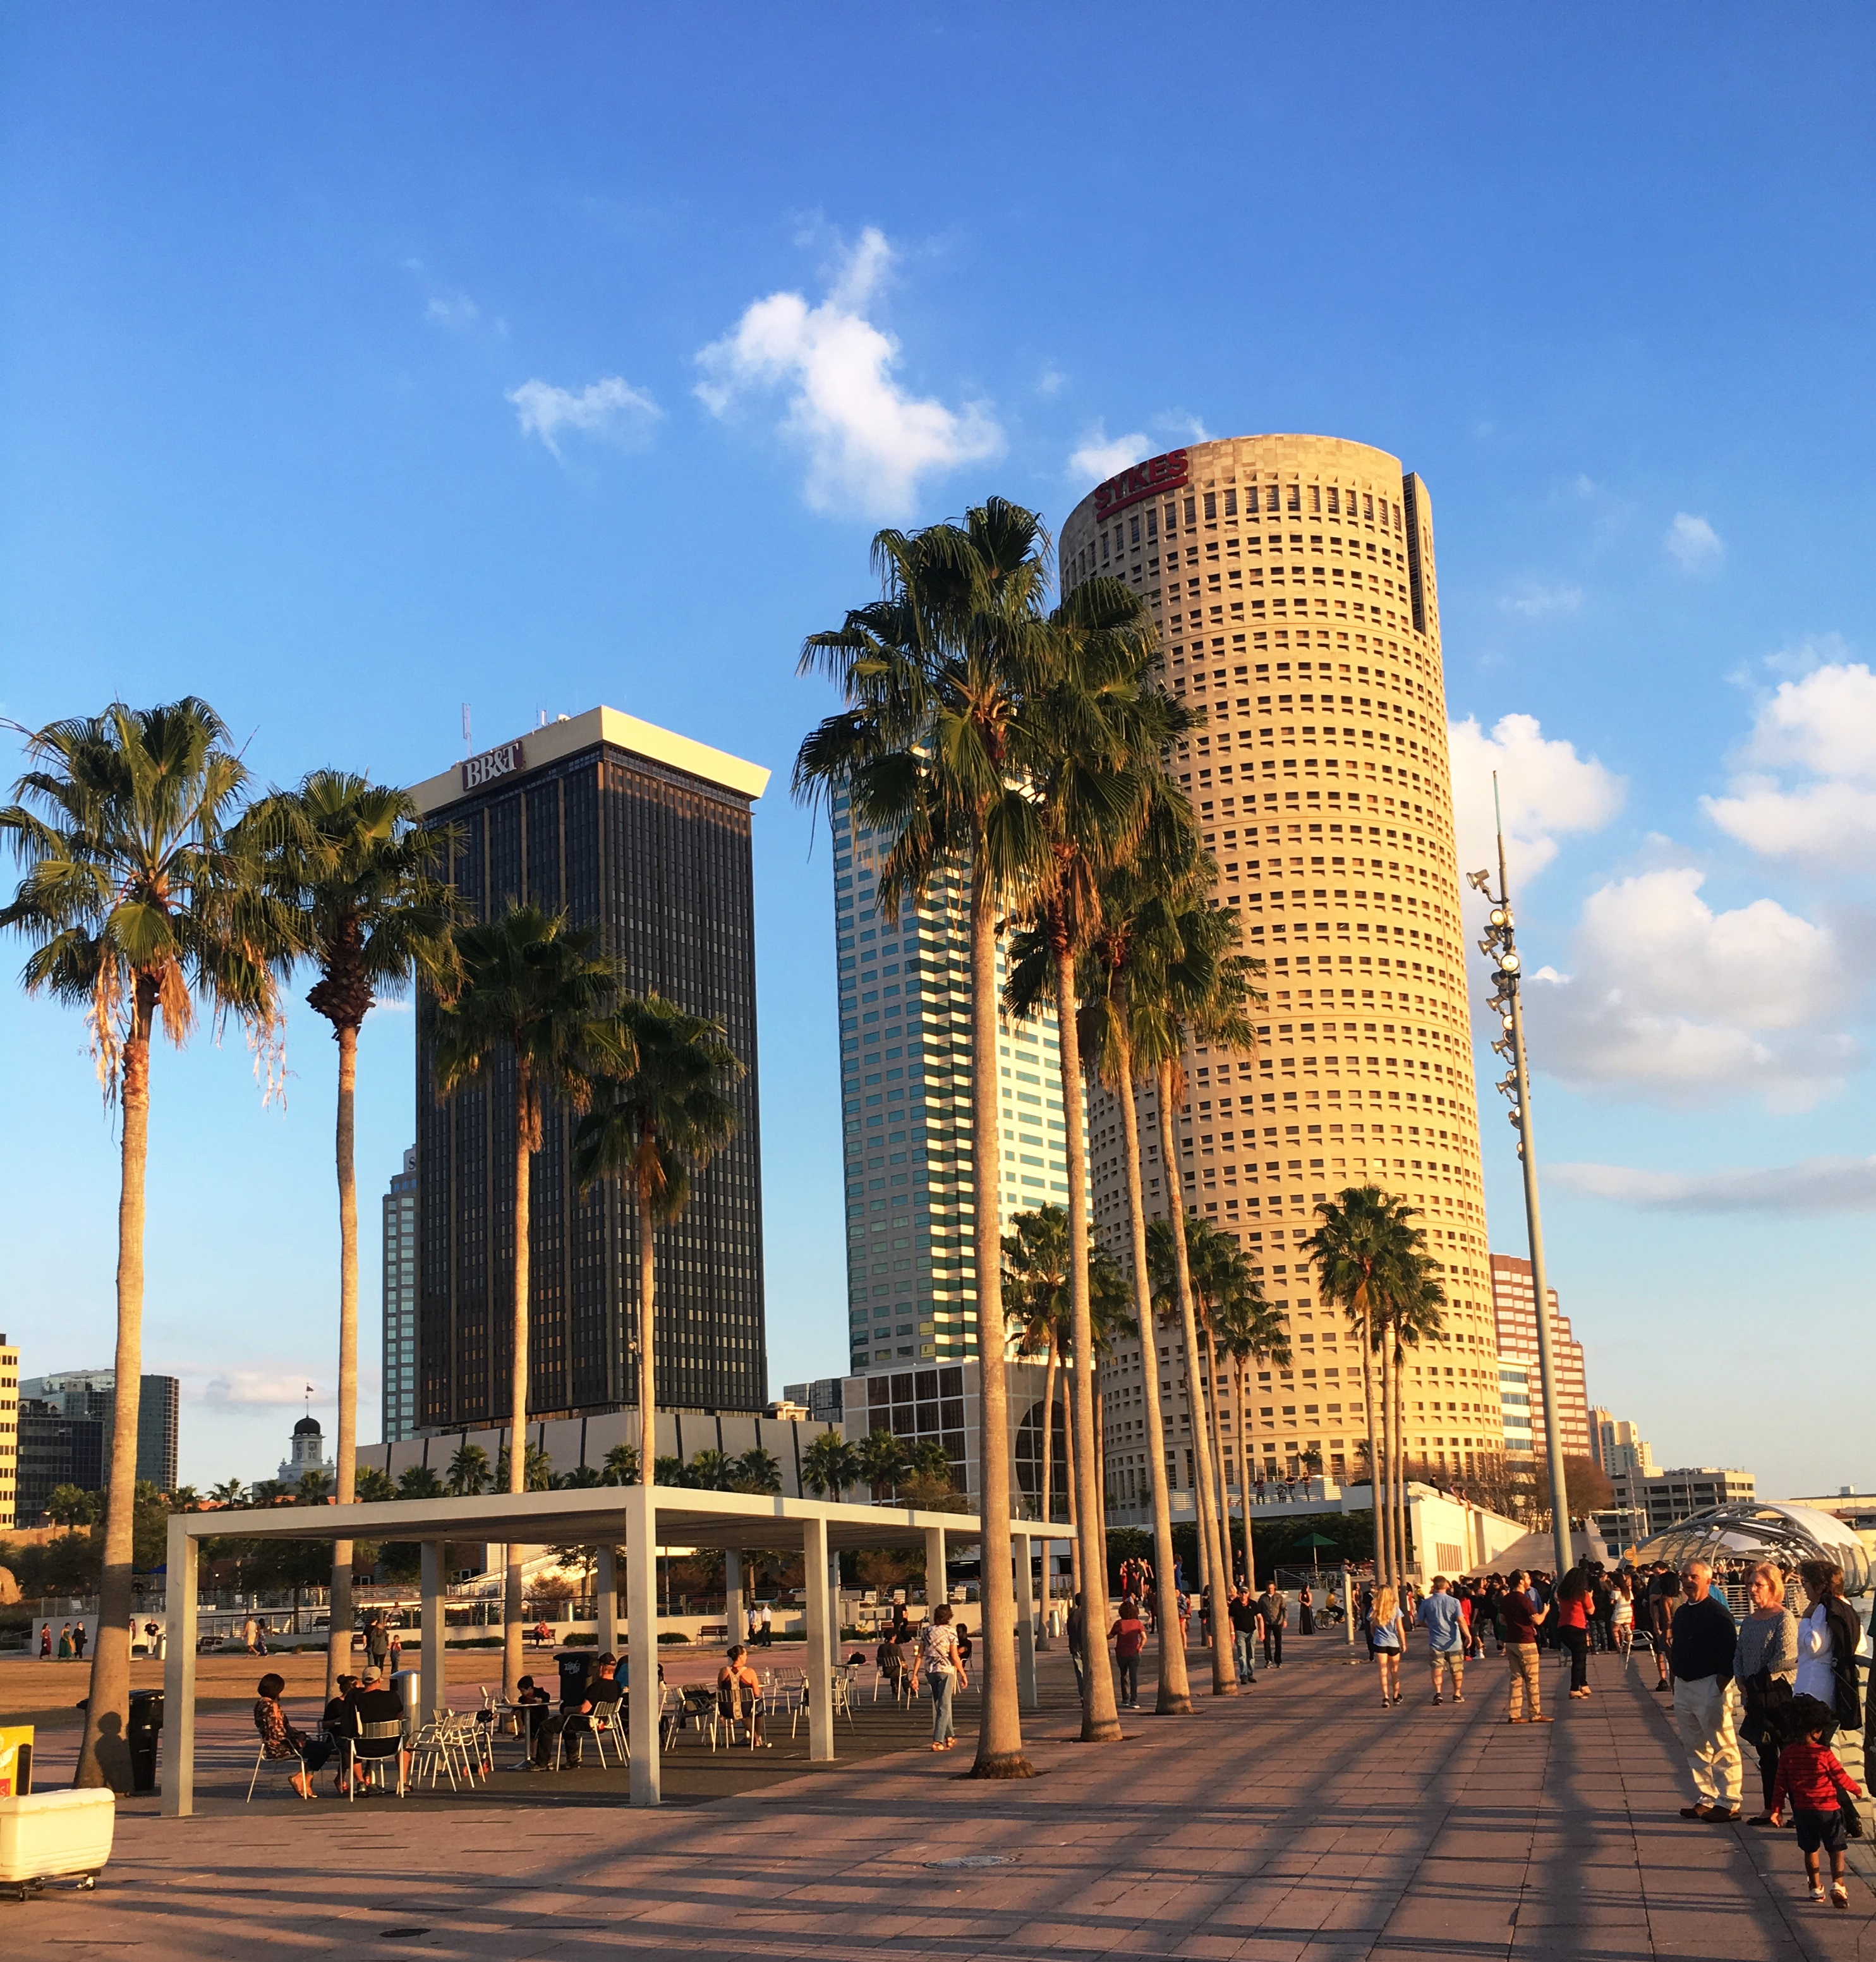 Tampa has a Riverwalk? - Yes, see how beautiful it is